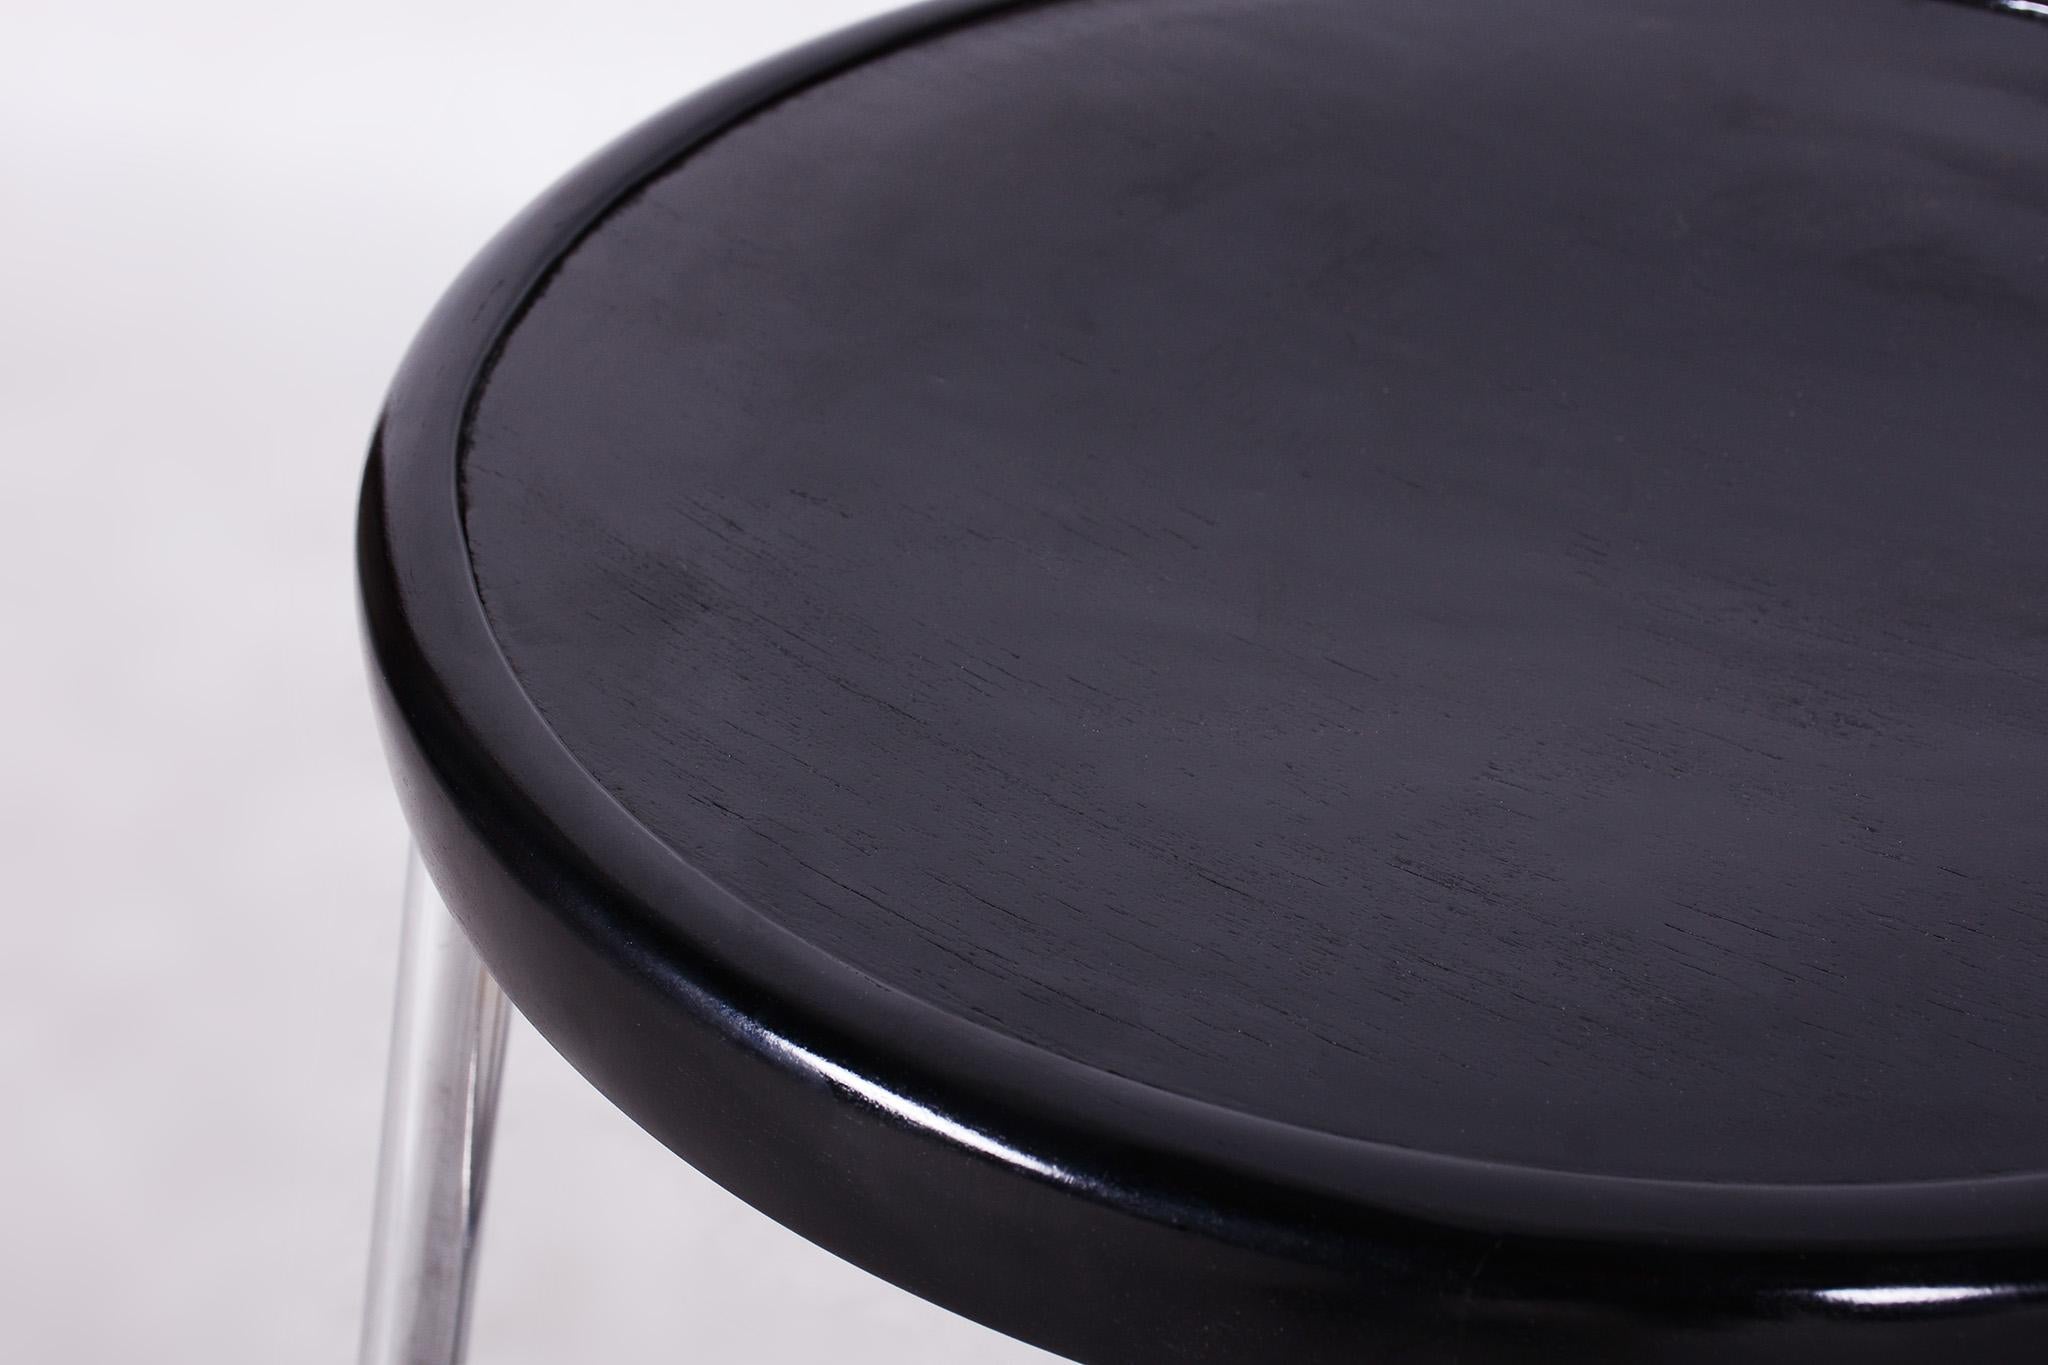 Restored Bauhaus black stool.

Source: Czechia (Czehoslovakia)
Period: 1930-1939
Material: Beech, Chrome-Plated Steel

Our professional refurbishing team in Czechia has fully restored it according to the original process. The chrome parts have